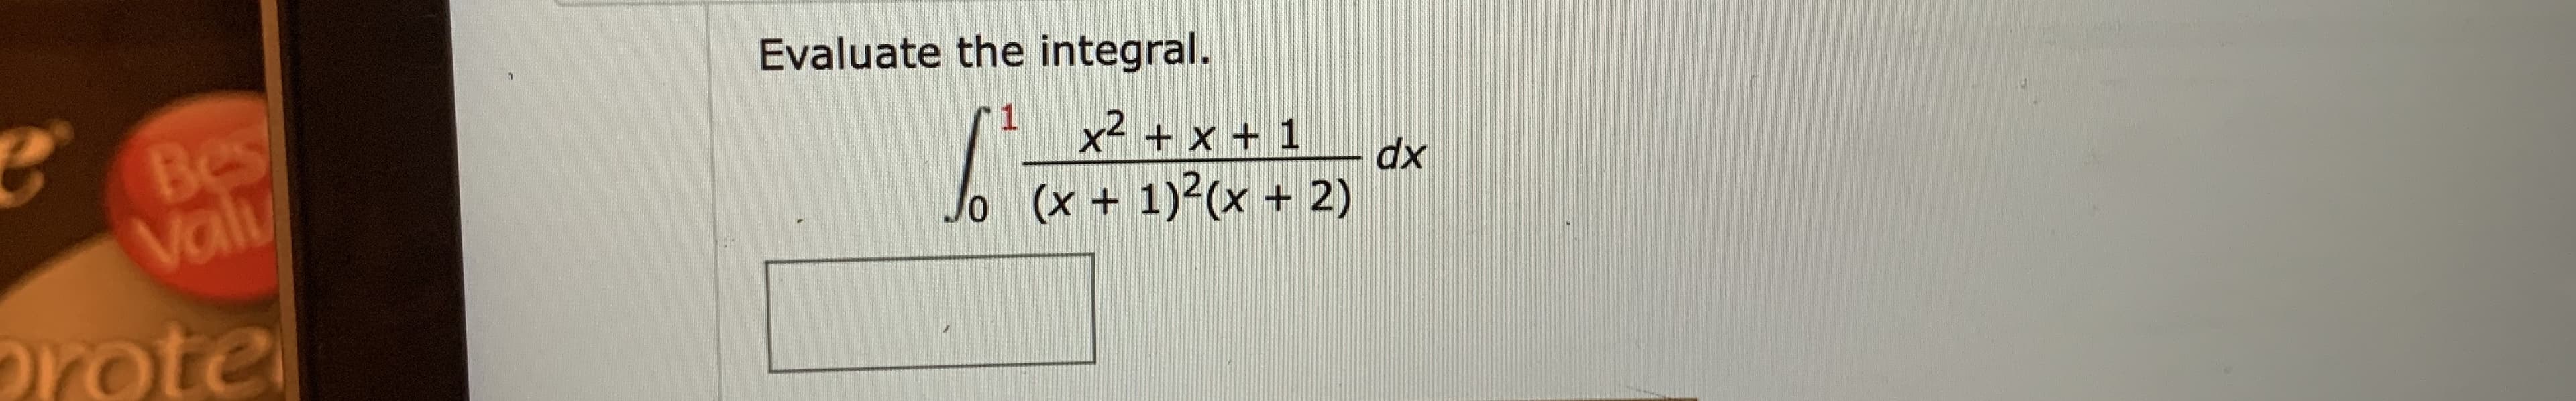 Evaluate the integral.
Bes
Valy
brote
x2 + x + 1
dx
Jo (x + 1)2(x + 2)
